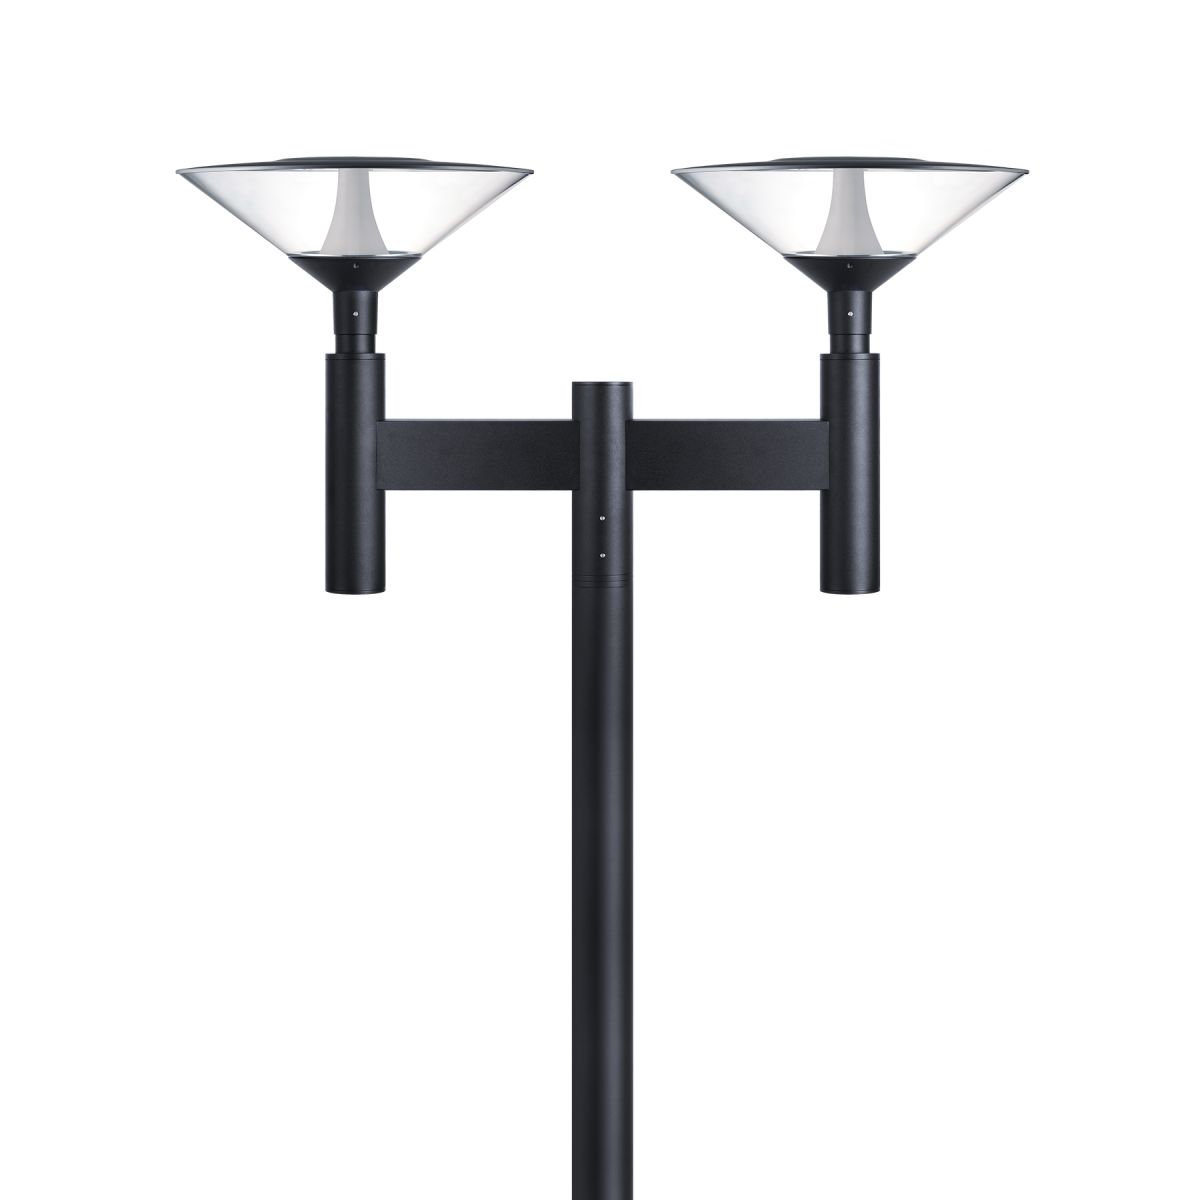 NEOPLACE Direct - Pole Top Light / Double head